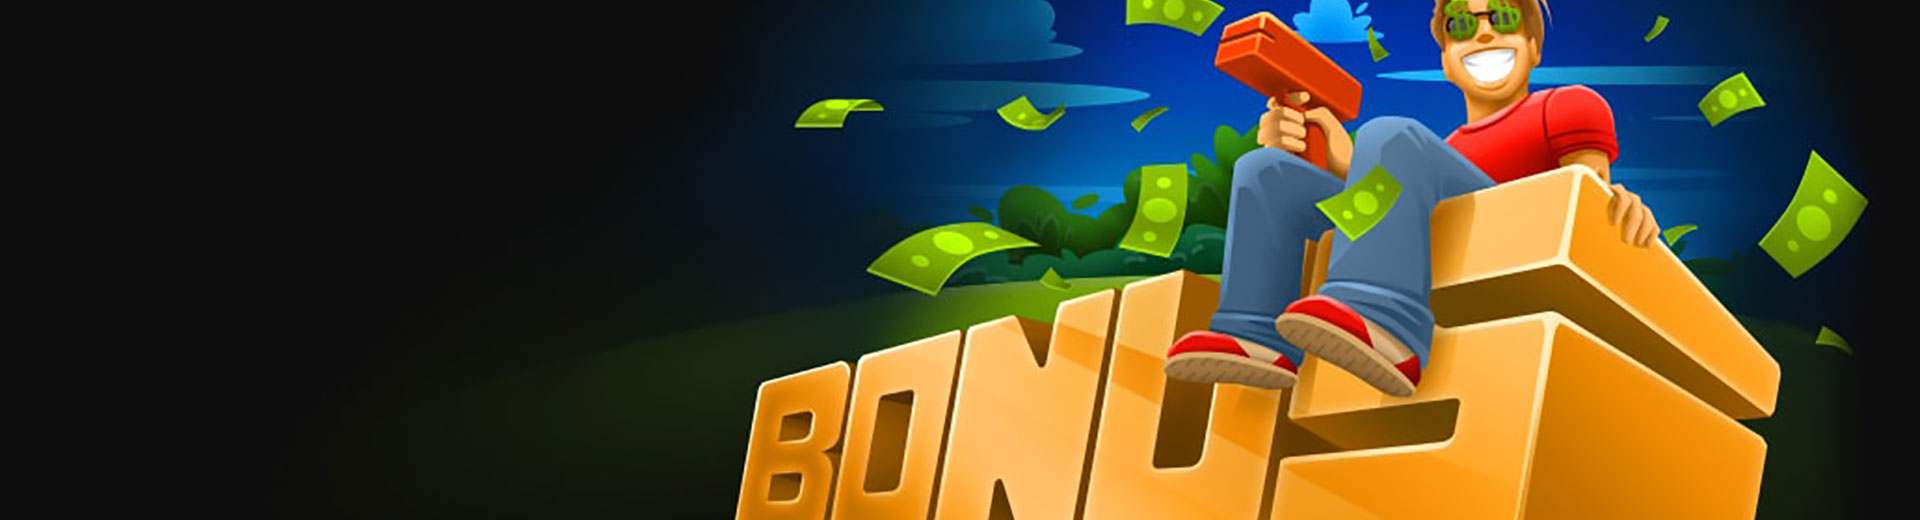 Free Spins and Tournaments Await Those Who Visit Betchan Casino